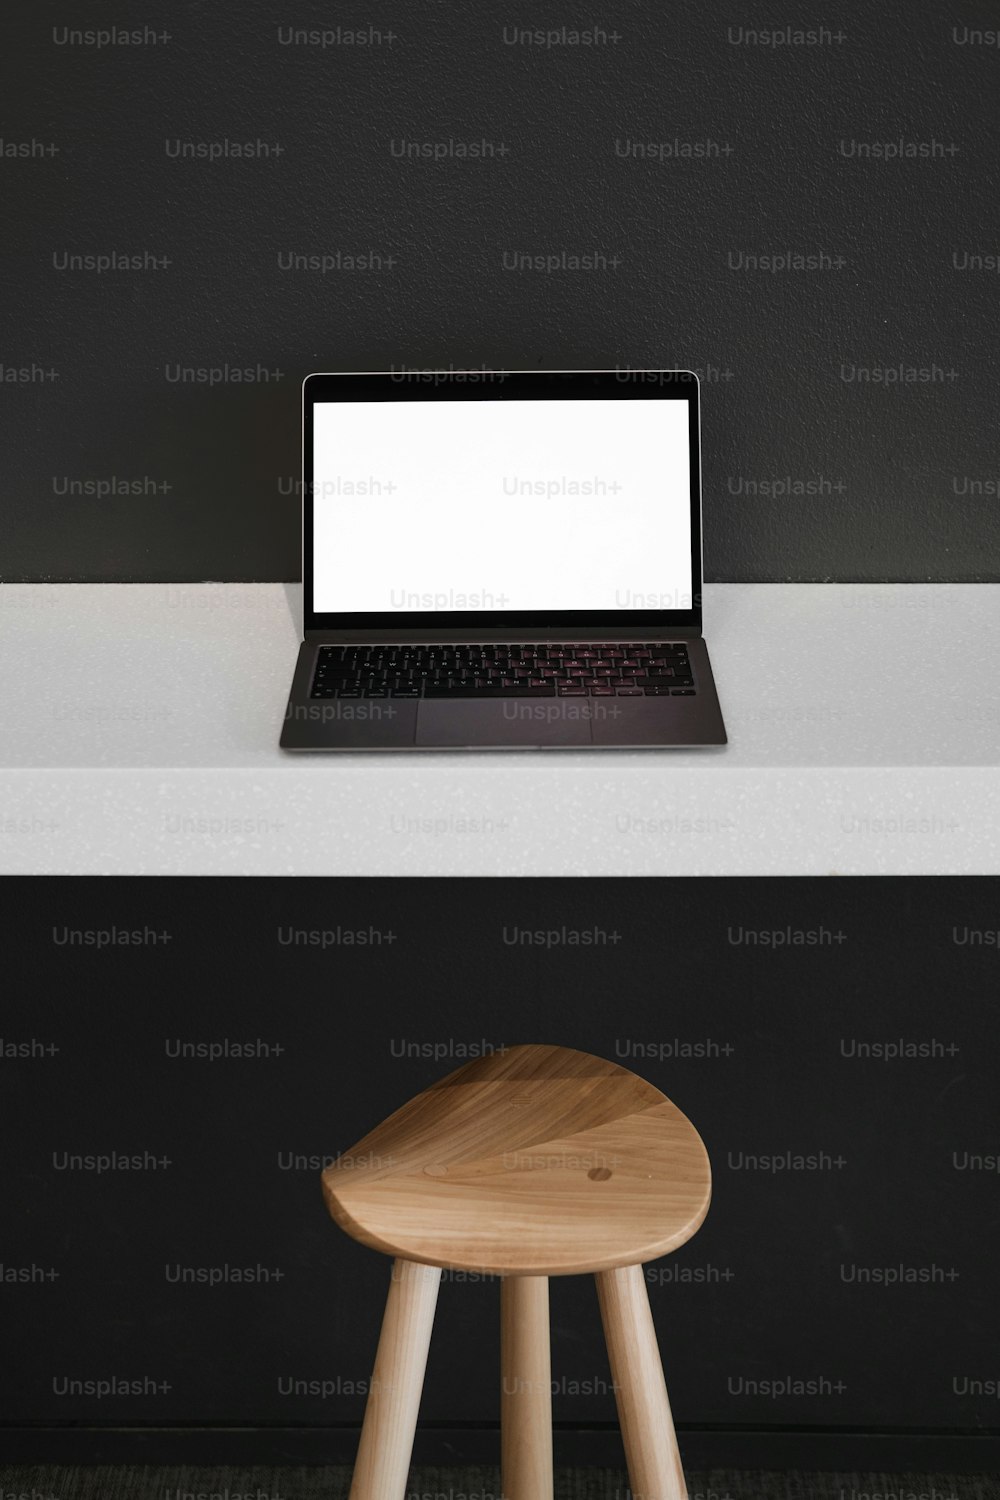 a laptop computer sitting on top of a wooden stool